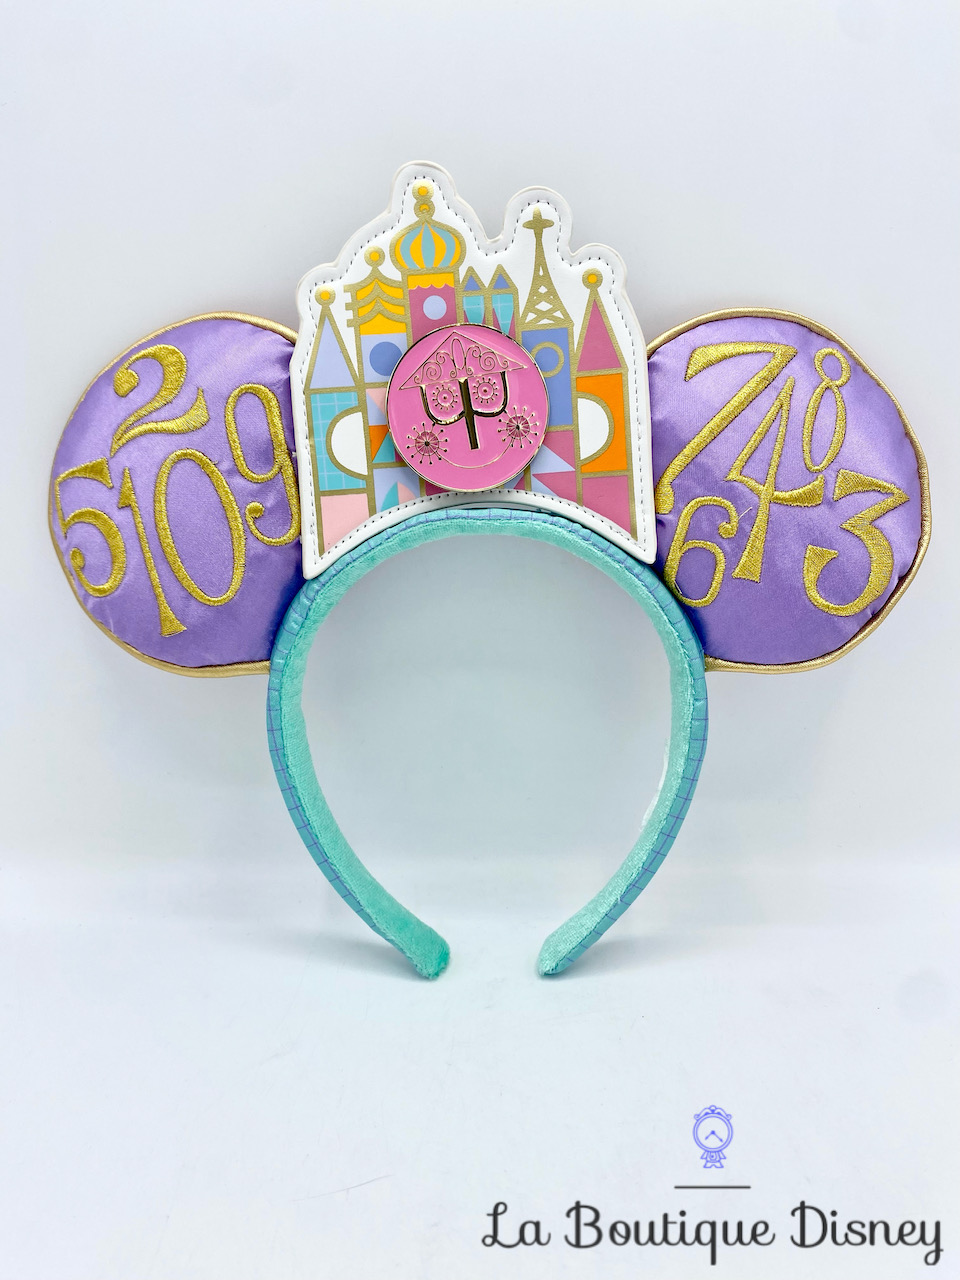 Serre tête Oreilles Mickey Mouse The Main Attraction Série 4 It\'s A Small World Disney Store Ears Édition limitée